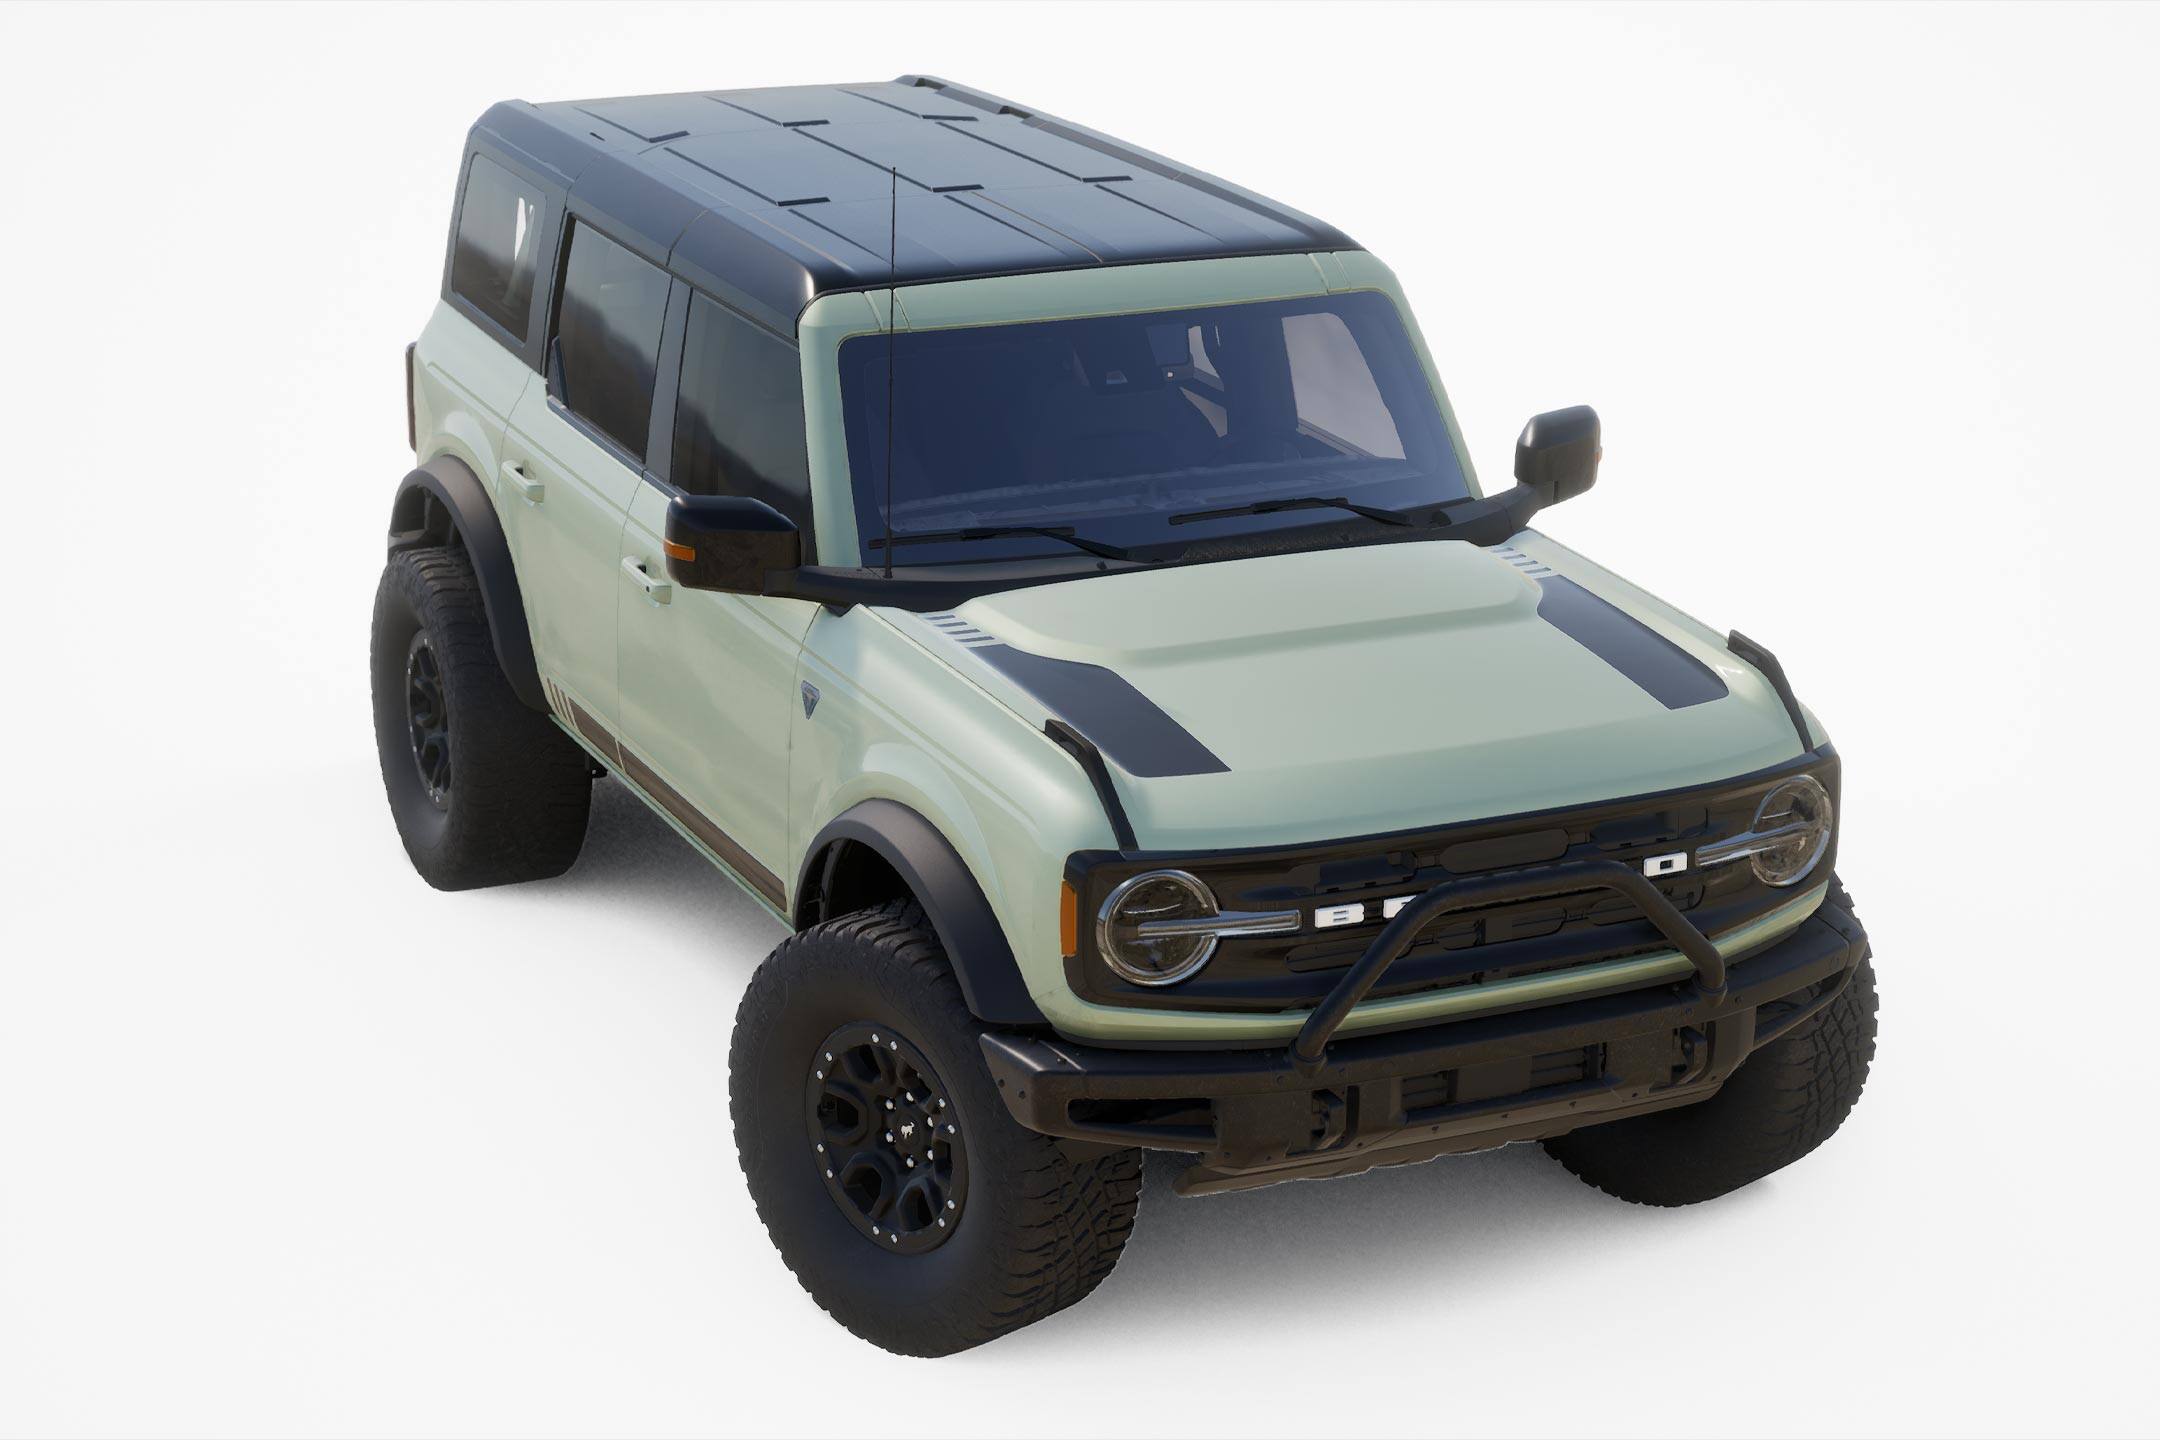 Firsts 2021. Форд Бронко 2021. Форд Bronco 2021. Ford Bronco first Edition 2021. Ford Bronco SUV 2021.